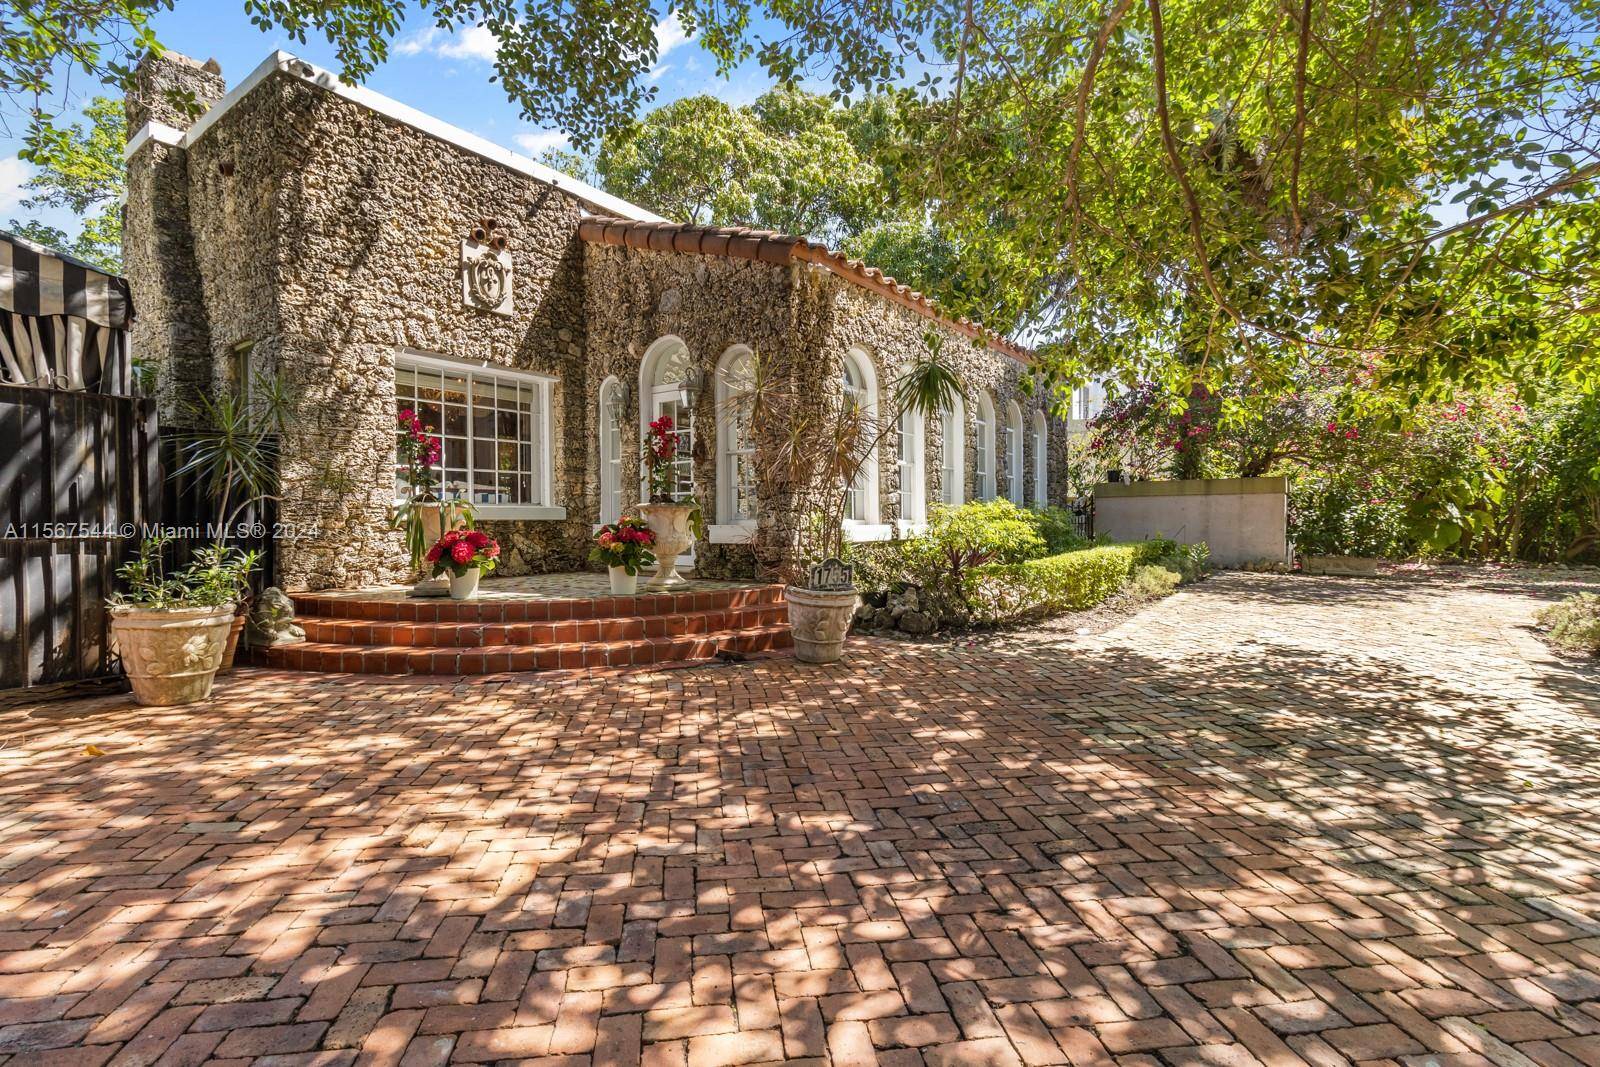 Nestled in the heart of historic Shenandoah Little Havana neighborhood, this 3, 670 Sq Ft Mediterranean Old Spanish architecture home was originally constructed in 1924 and remodeled in 2004.